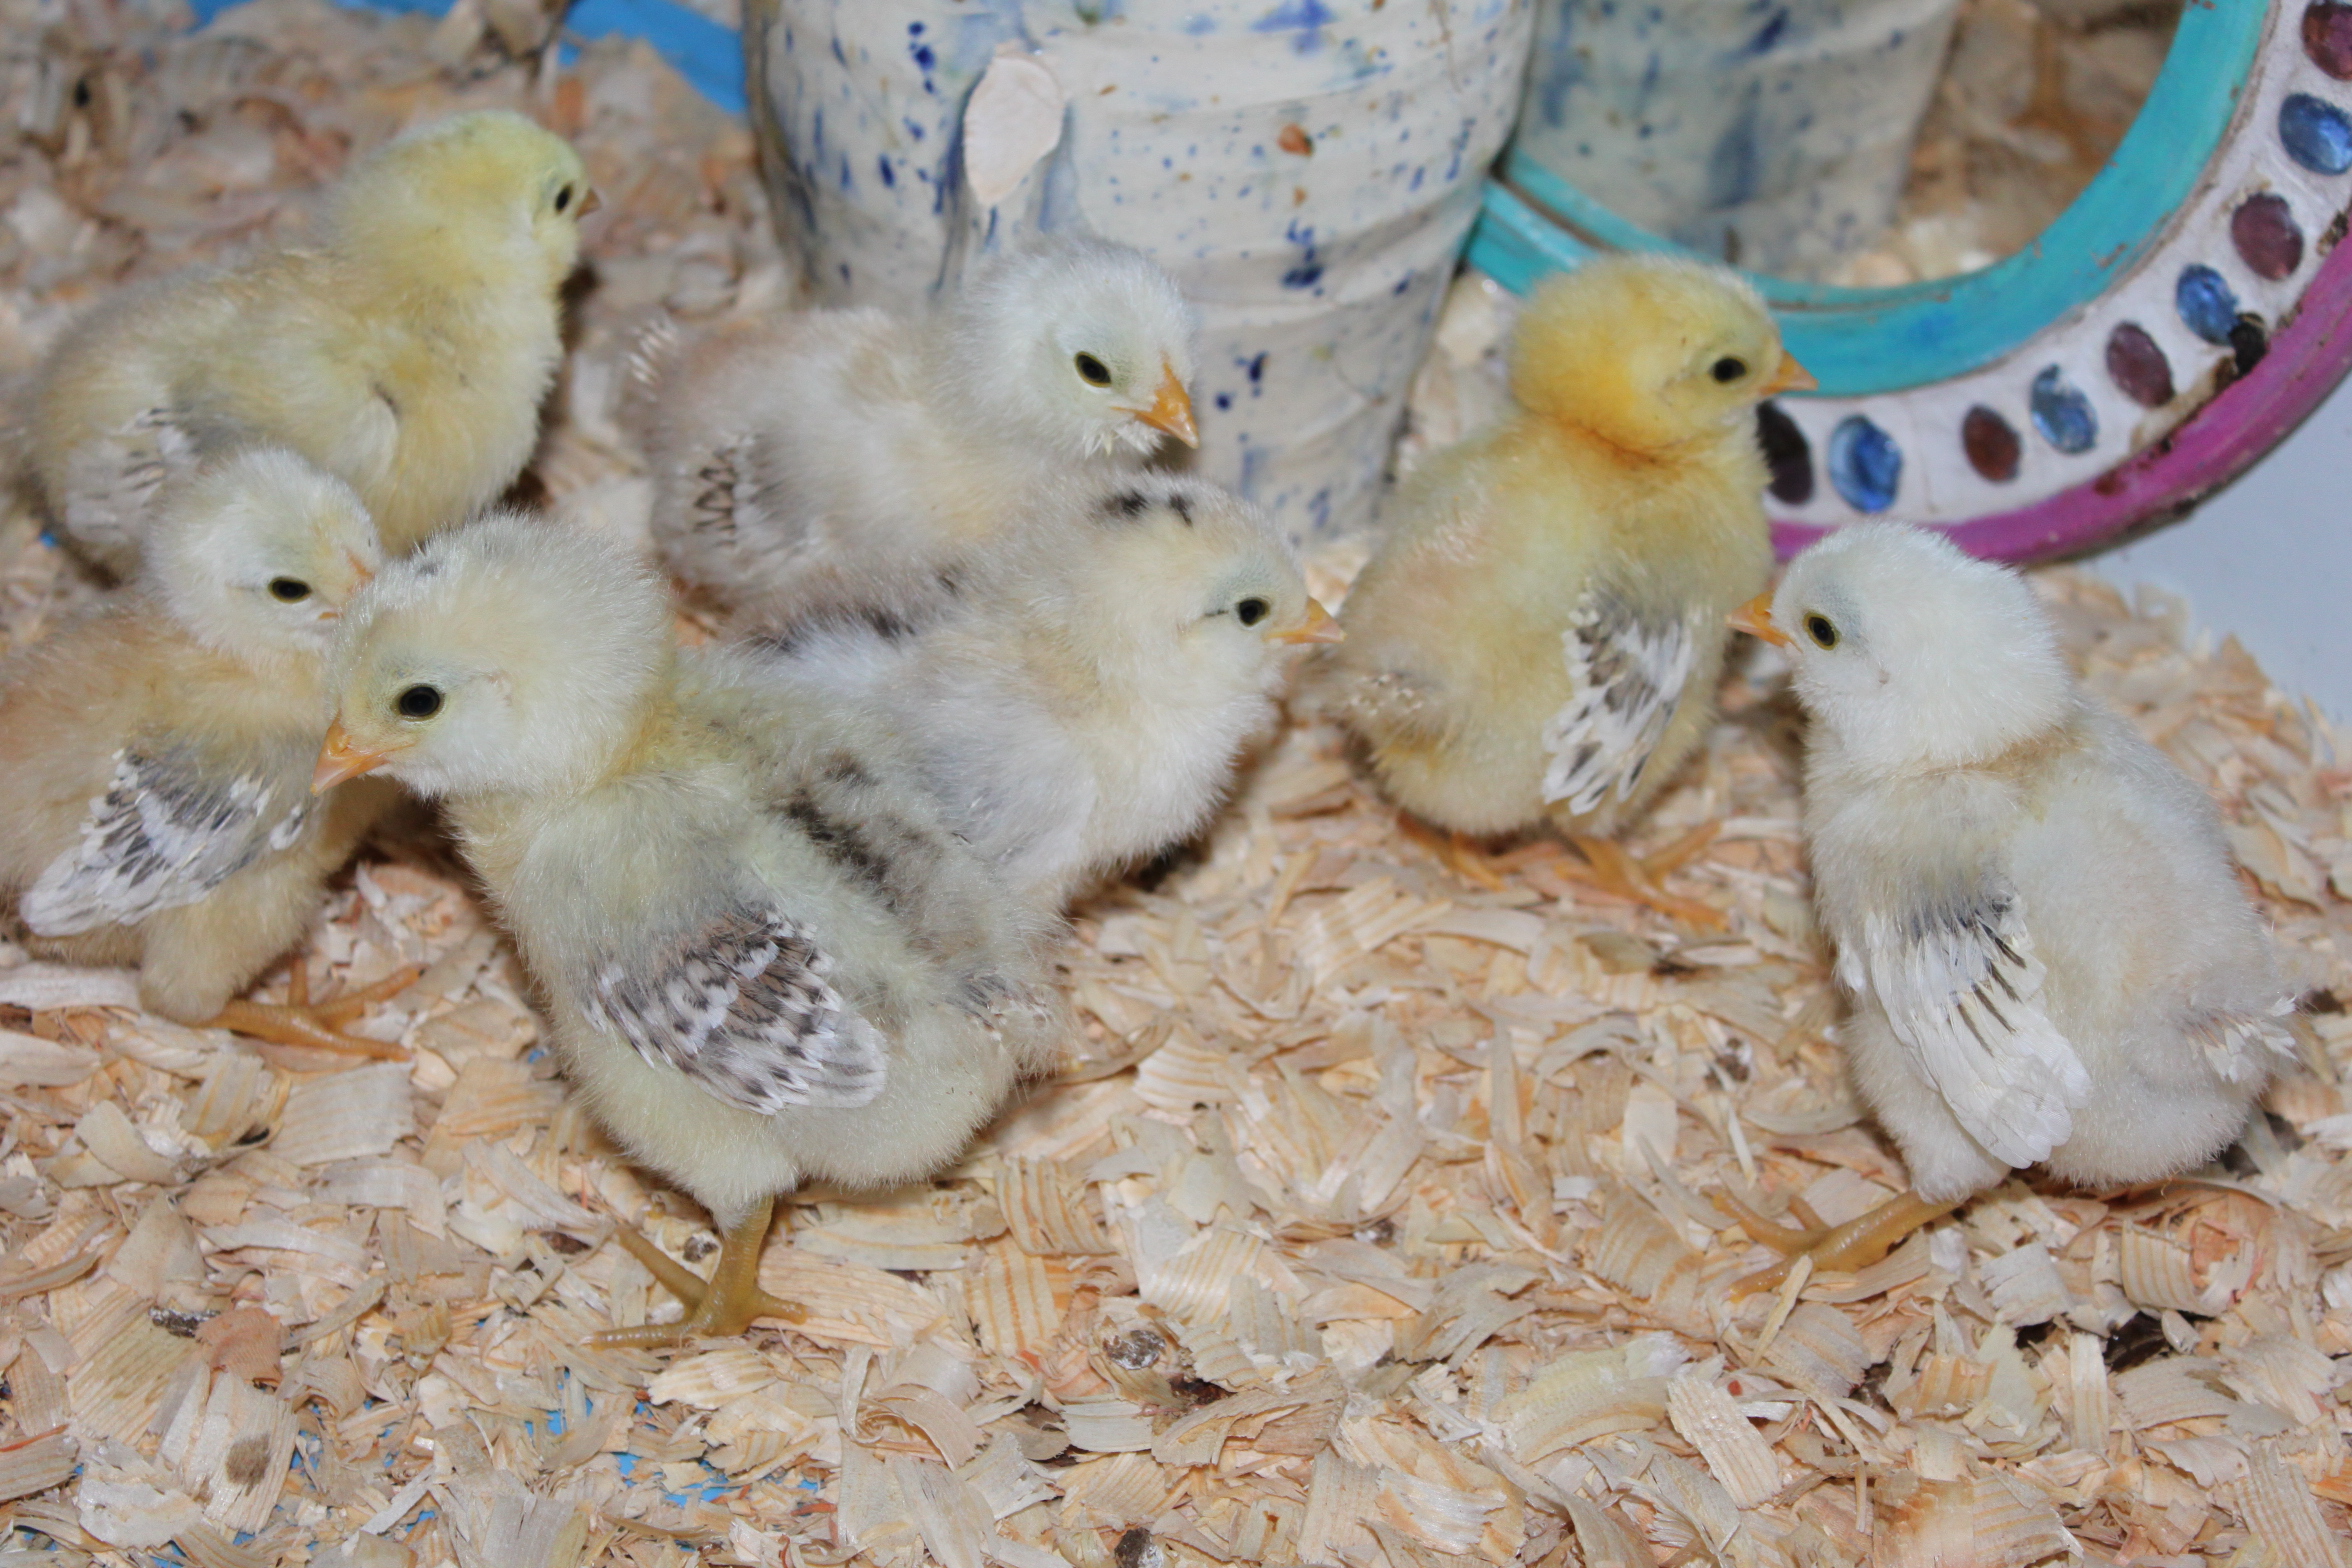 Chicks hatched late March 2012